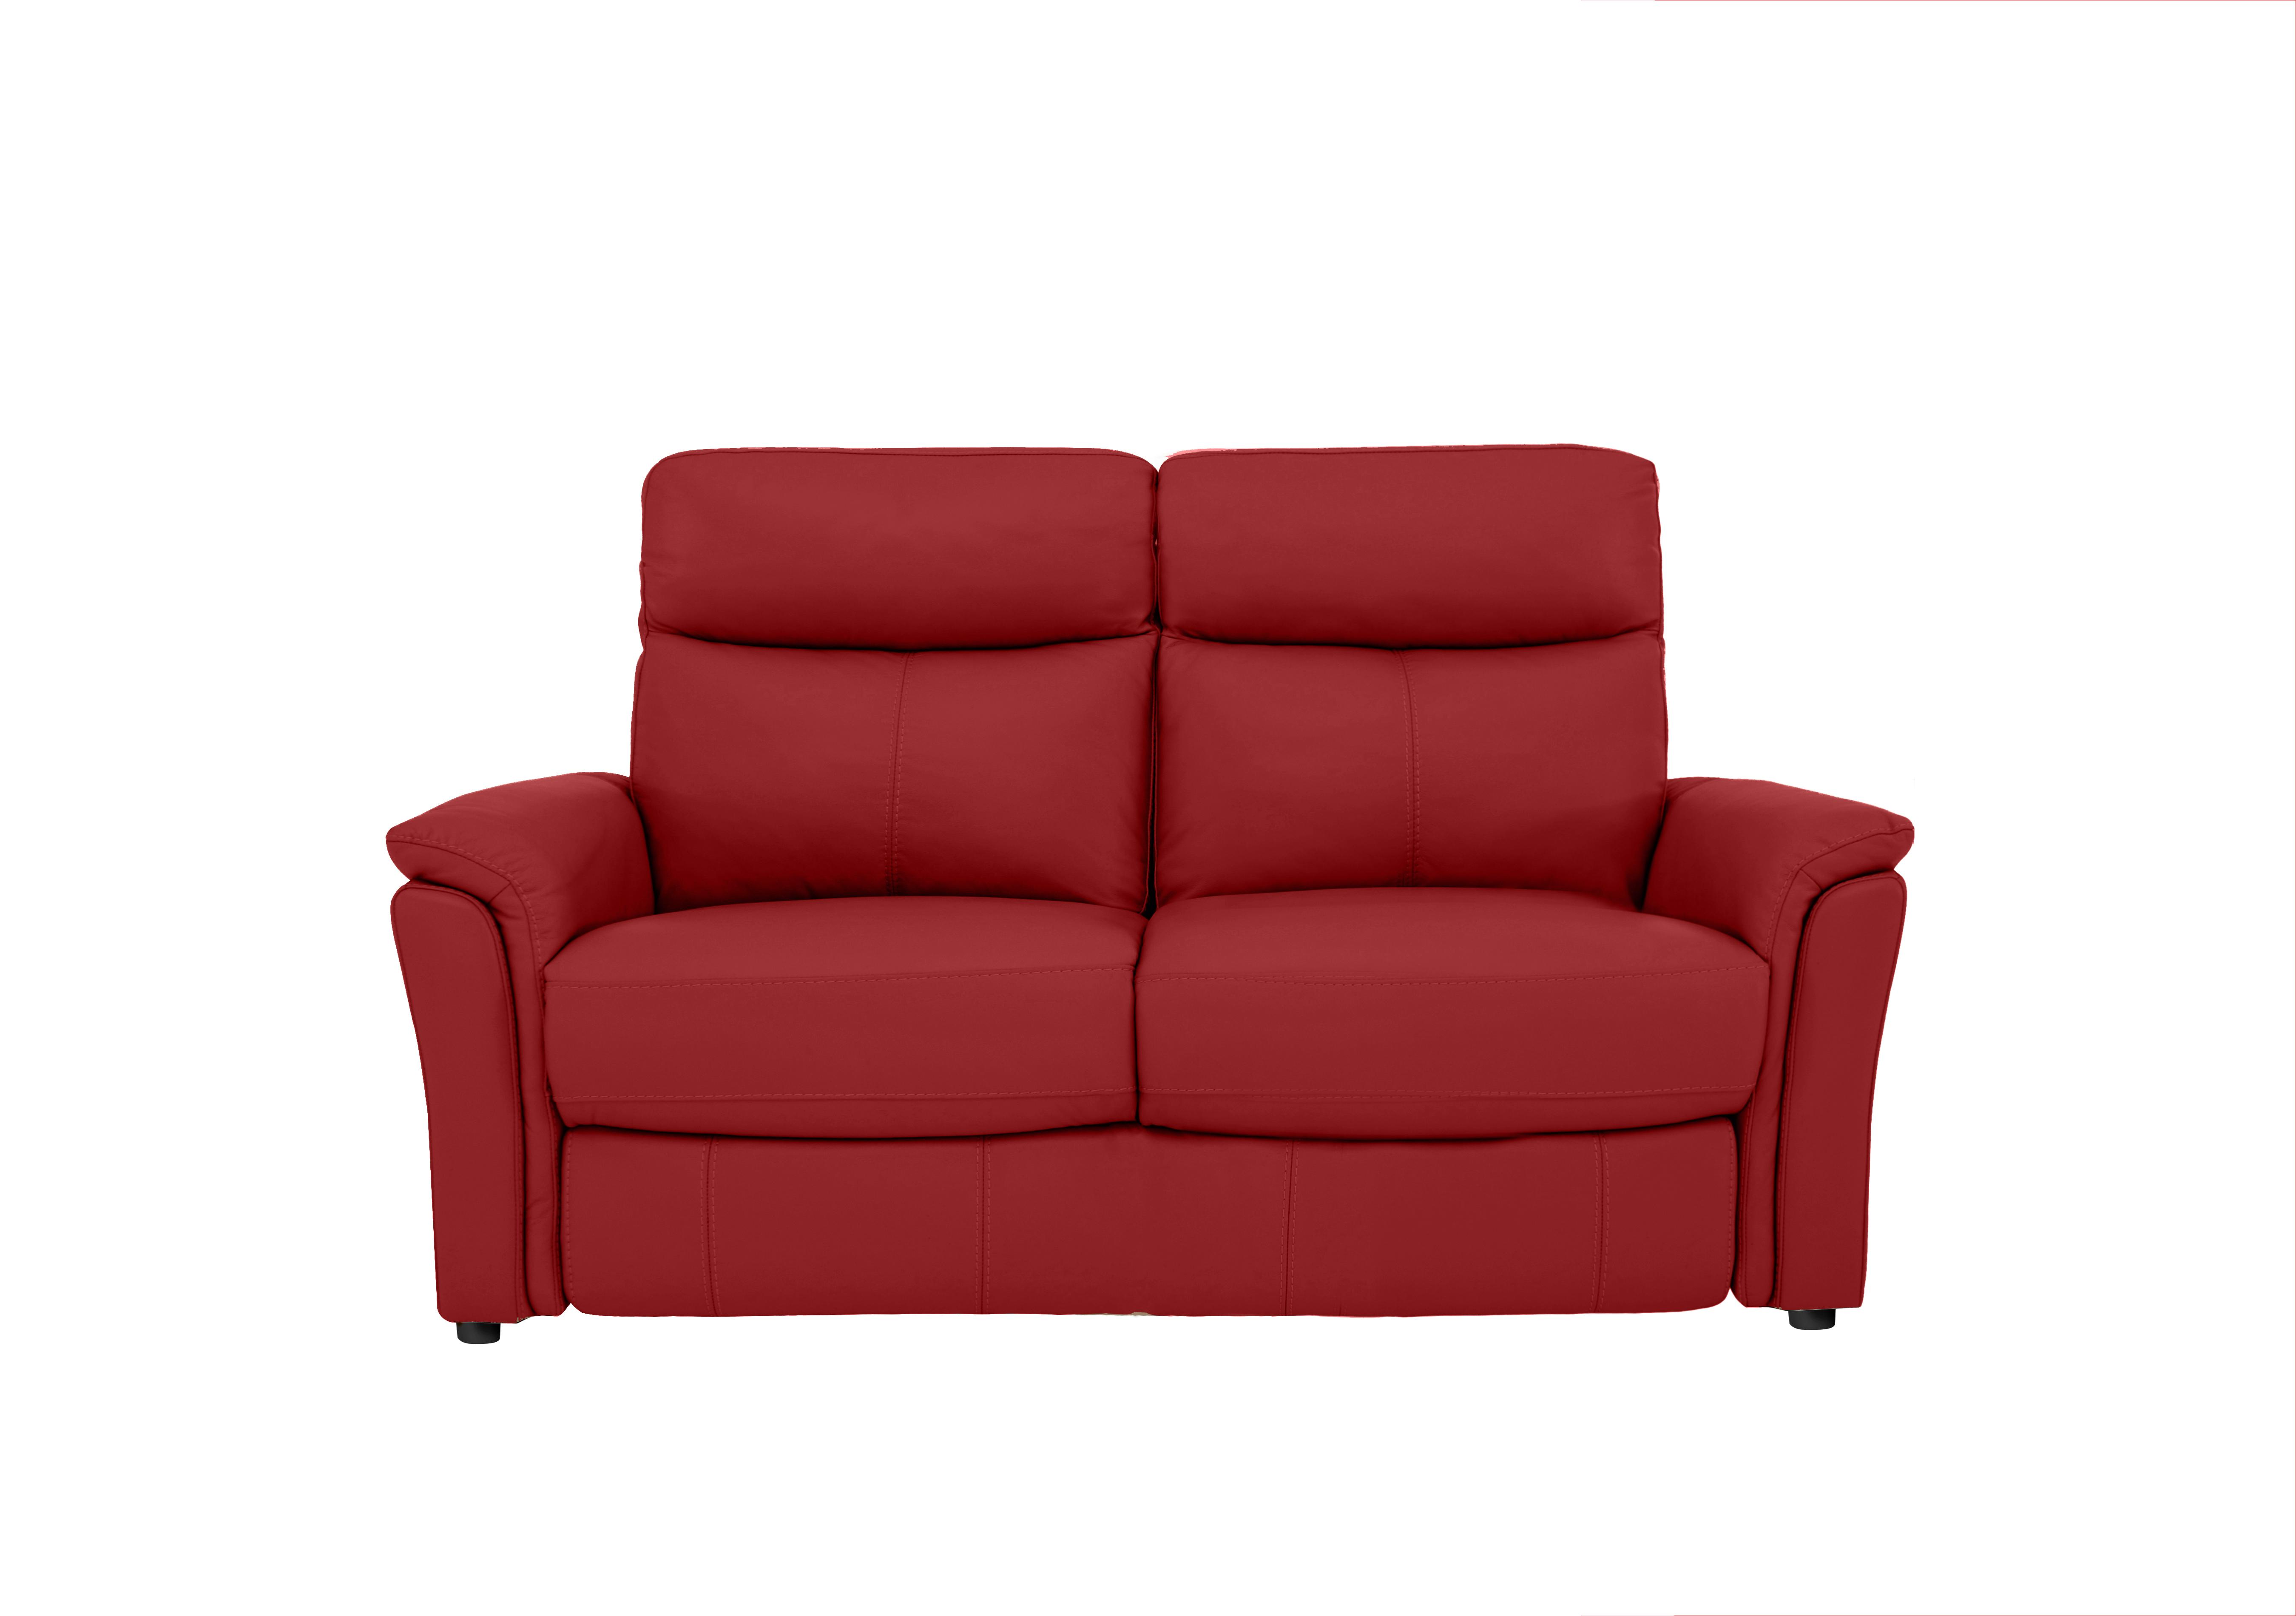 Compact Collection Piccolo 2 Seater Leather Static Sofa in Bv-0008 Pure Red on Furniture Village